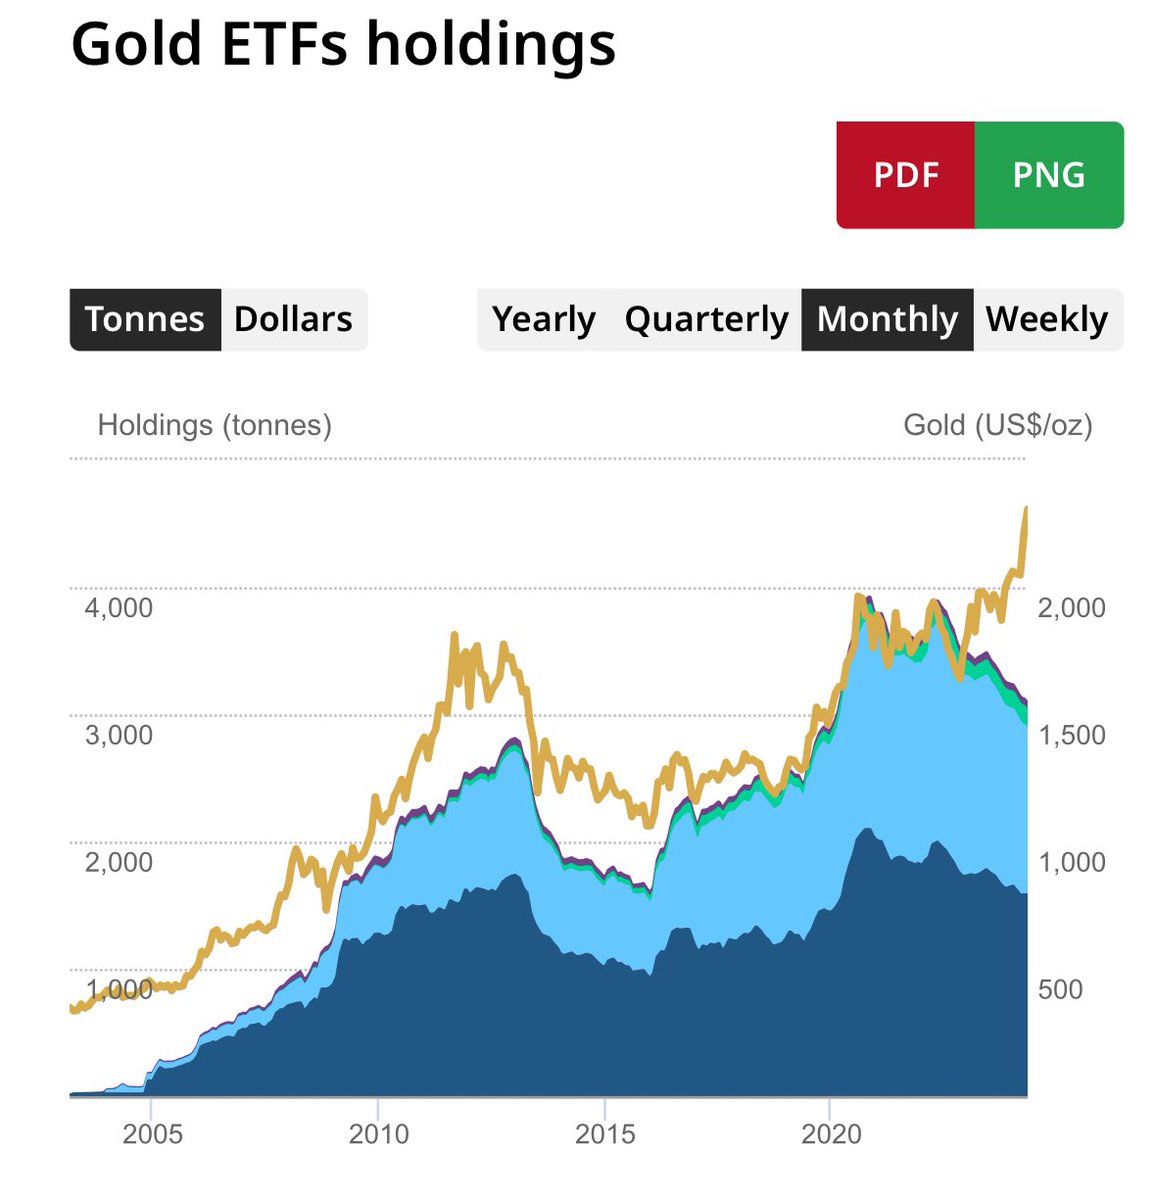 This has never happened before. Gold ETF holdings and the price of gold have completely diverged. They usually follow almost an exact similar trend.